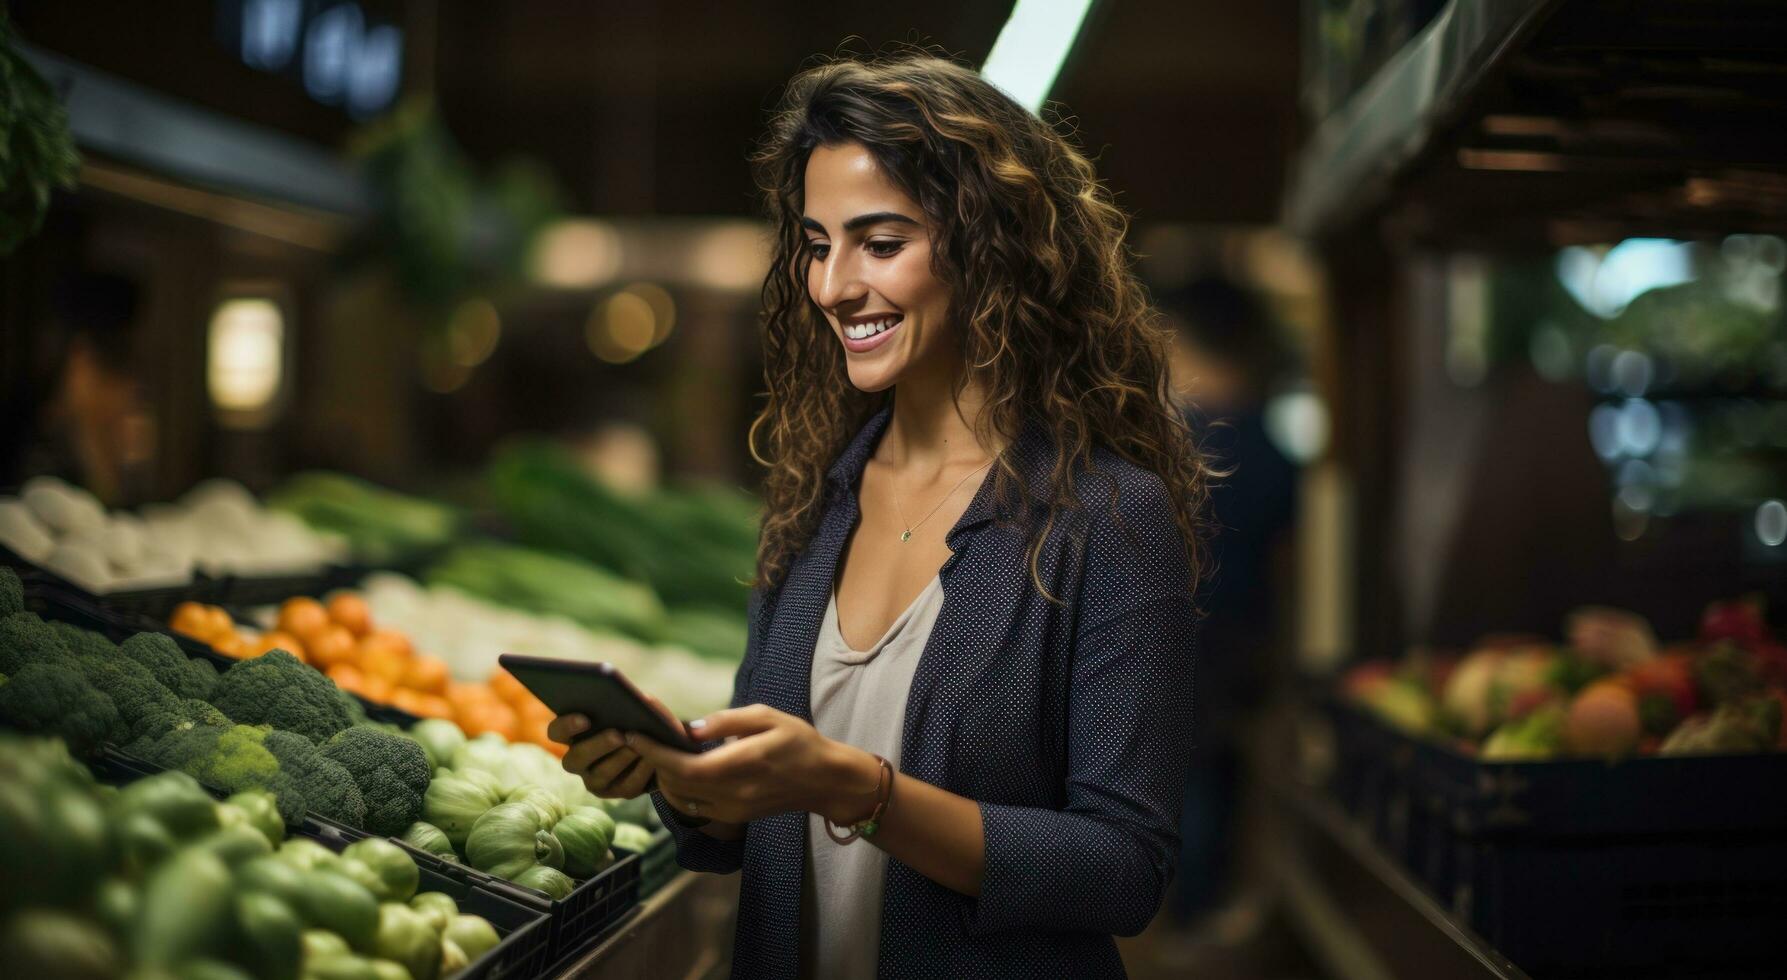 AI generated a woman smiling while holding her tablet in a produce section product photo